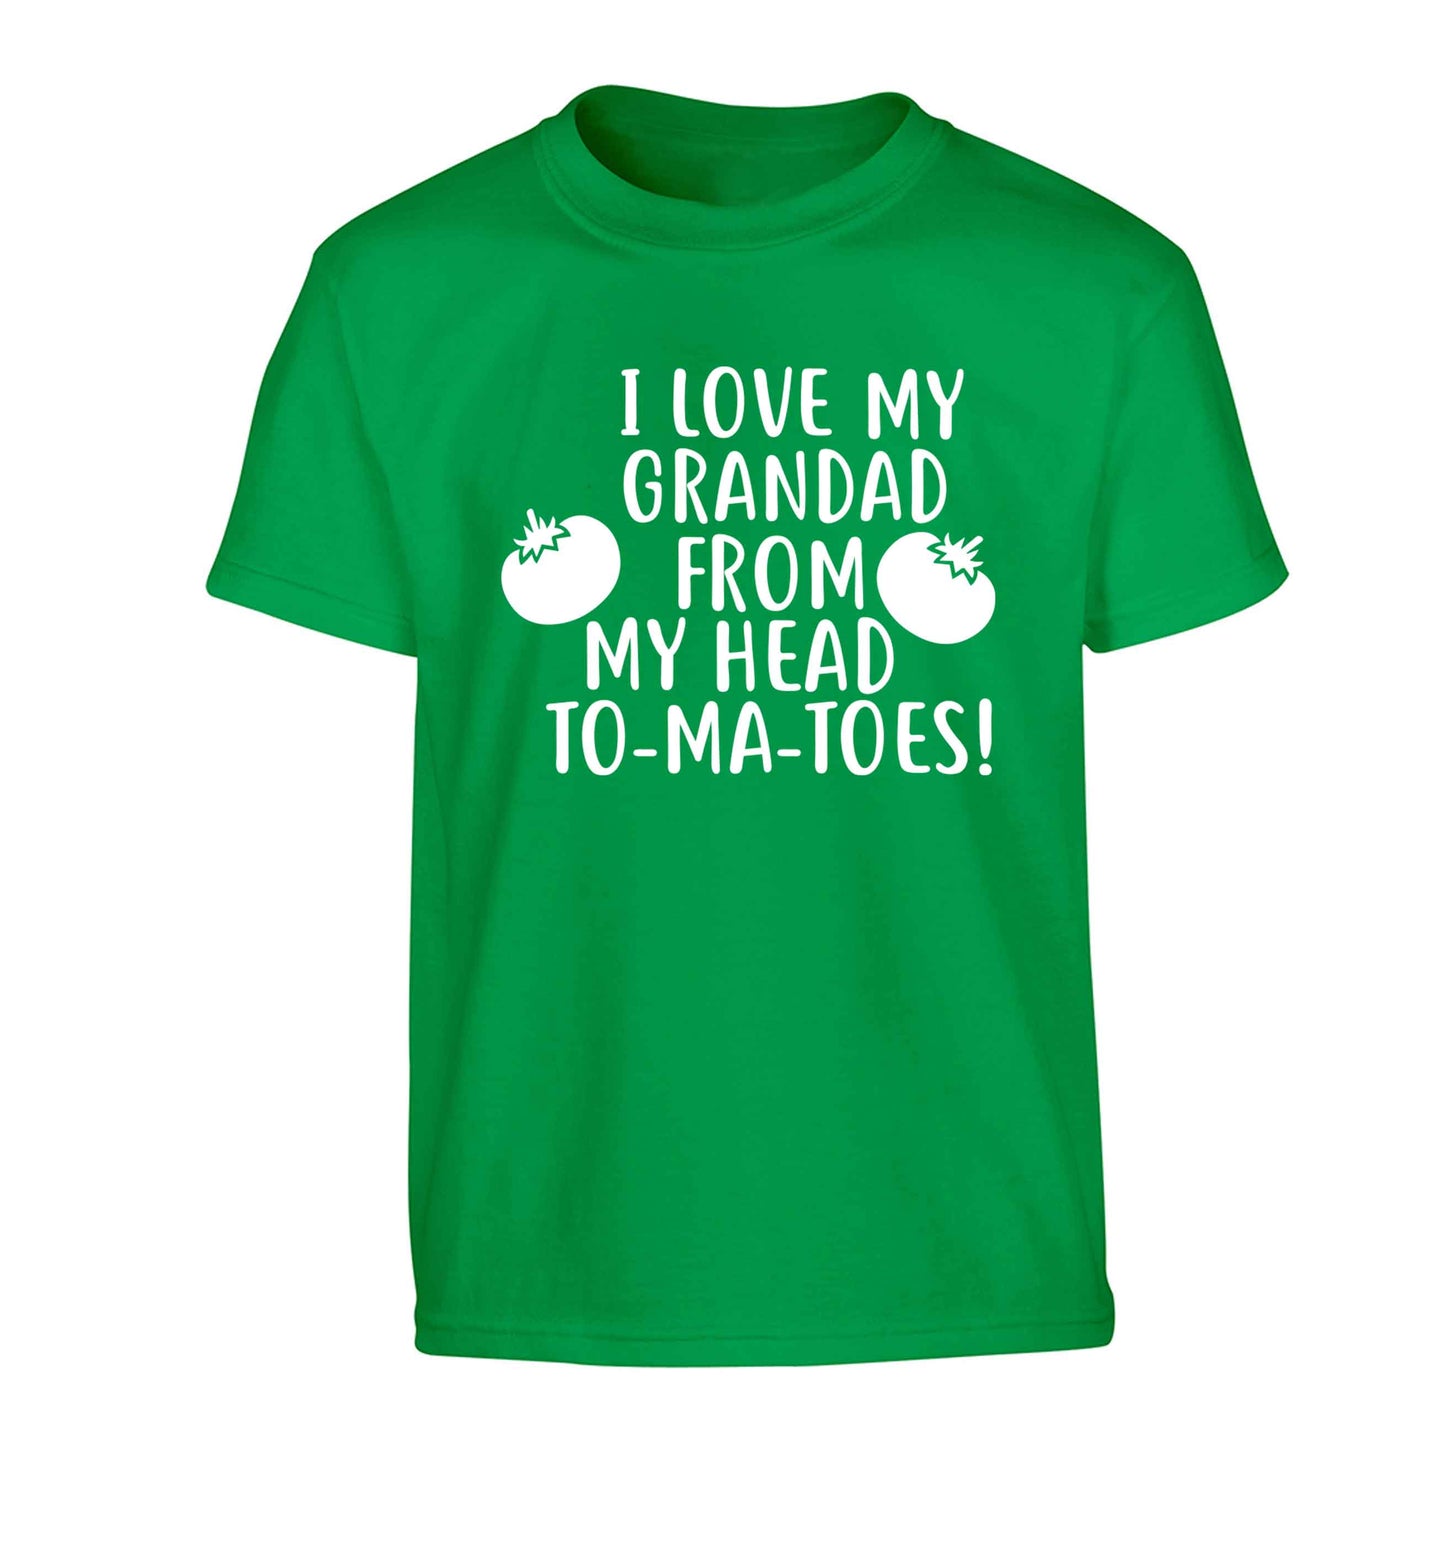 I love my grandad from my head To-Ma-Toes Children's green Tshirt 12-13 Years